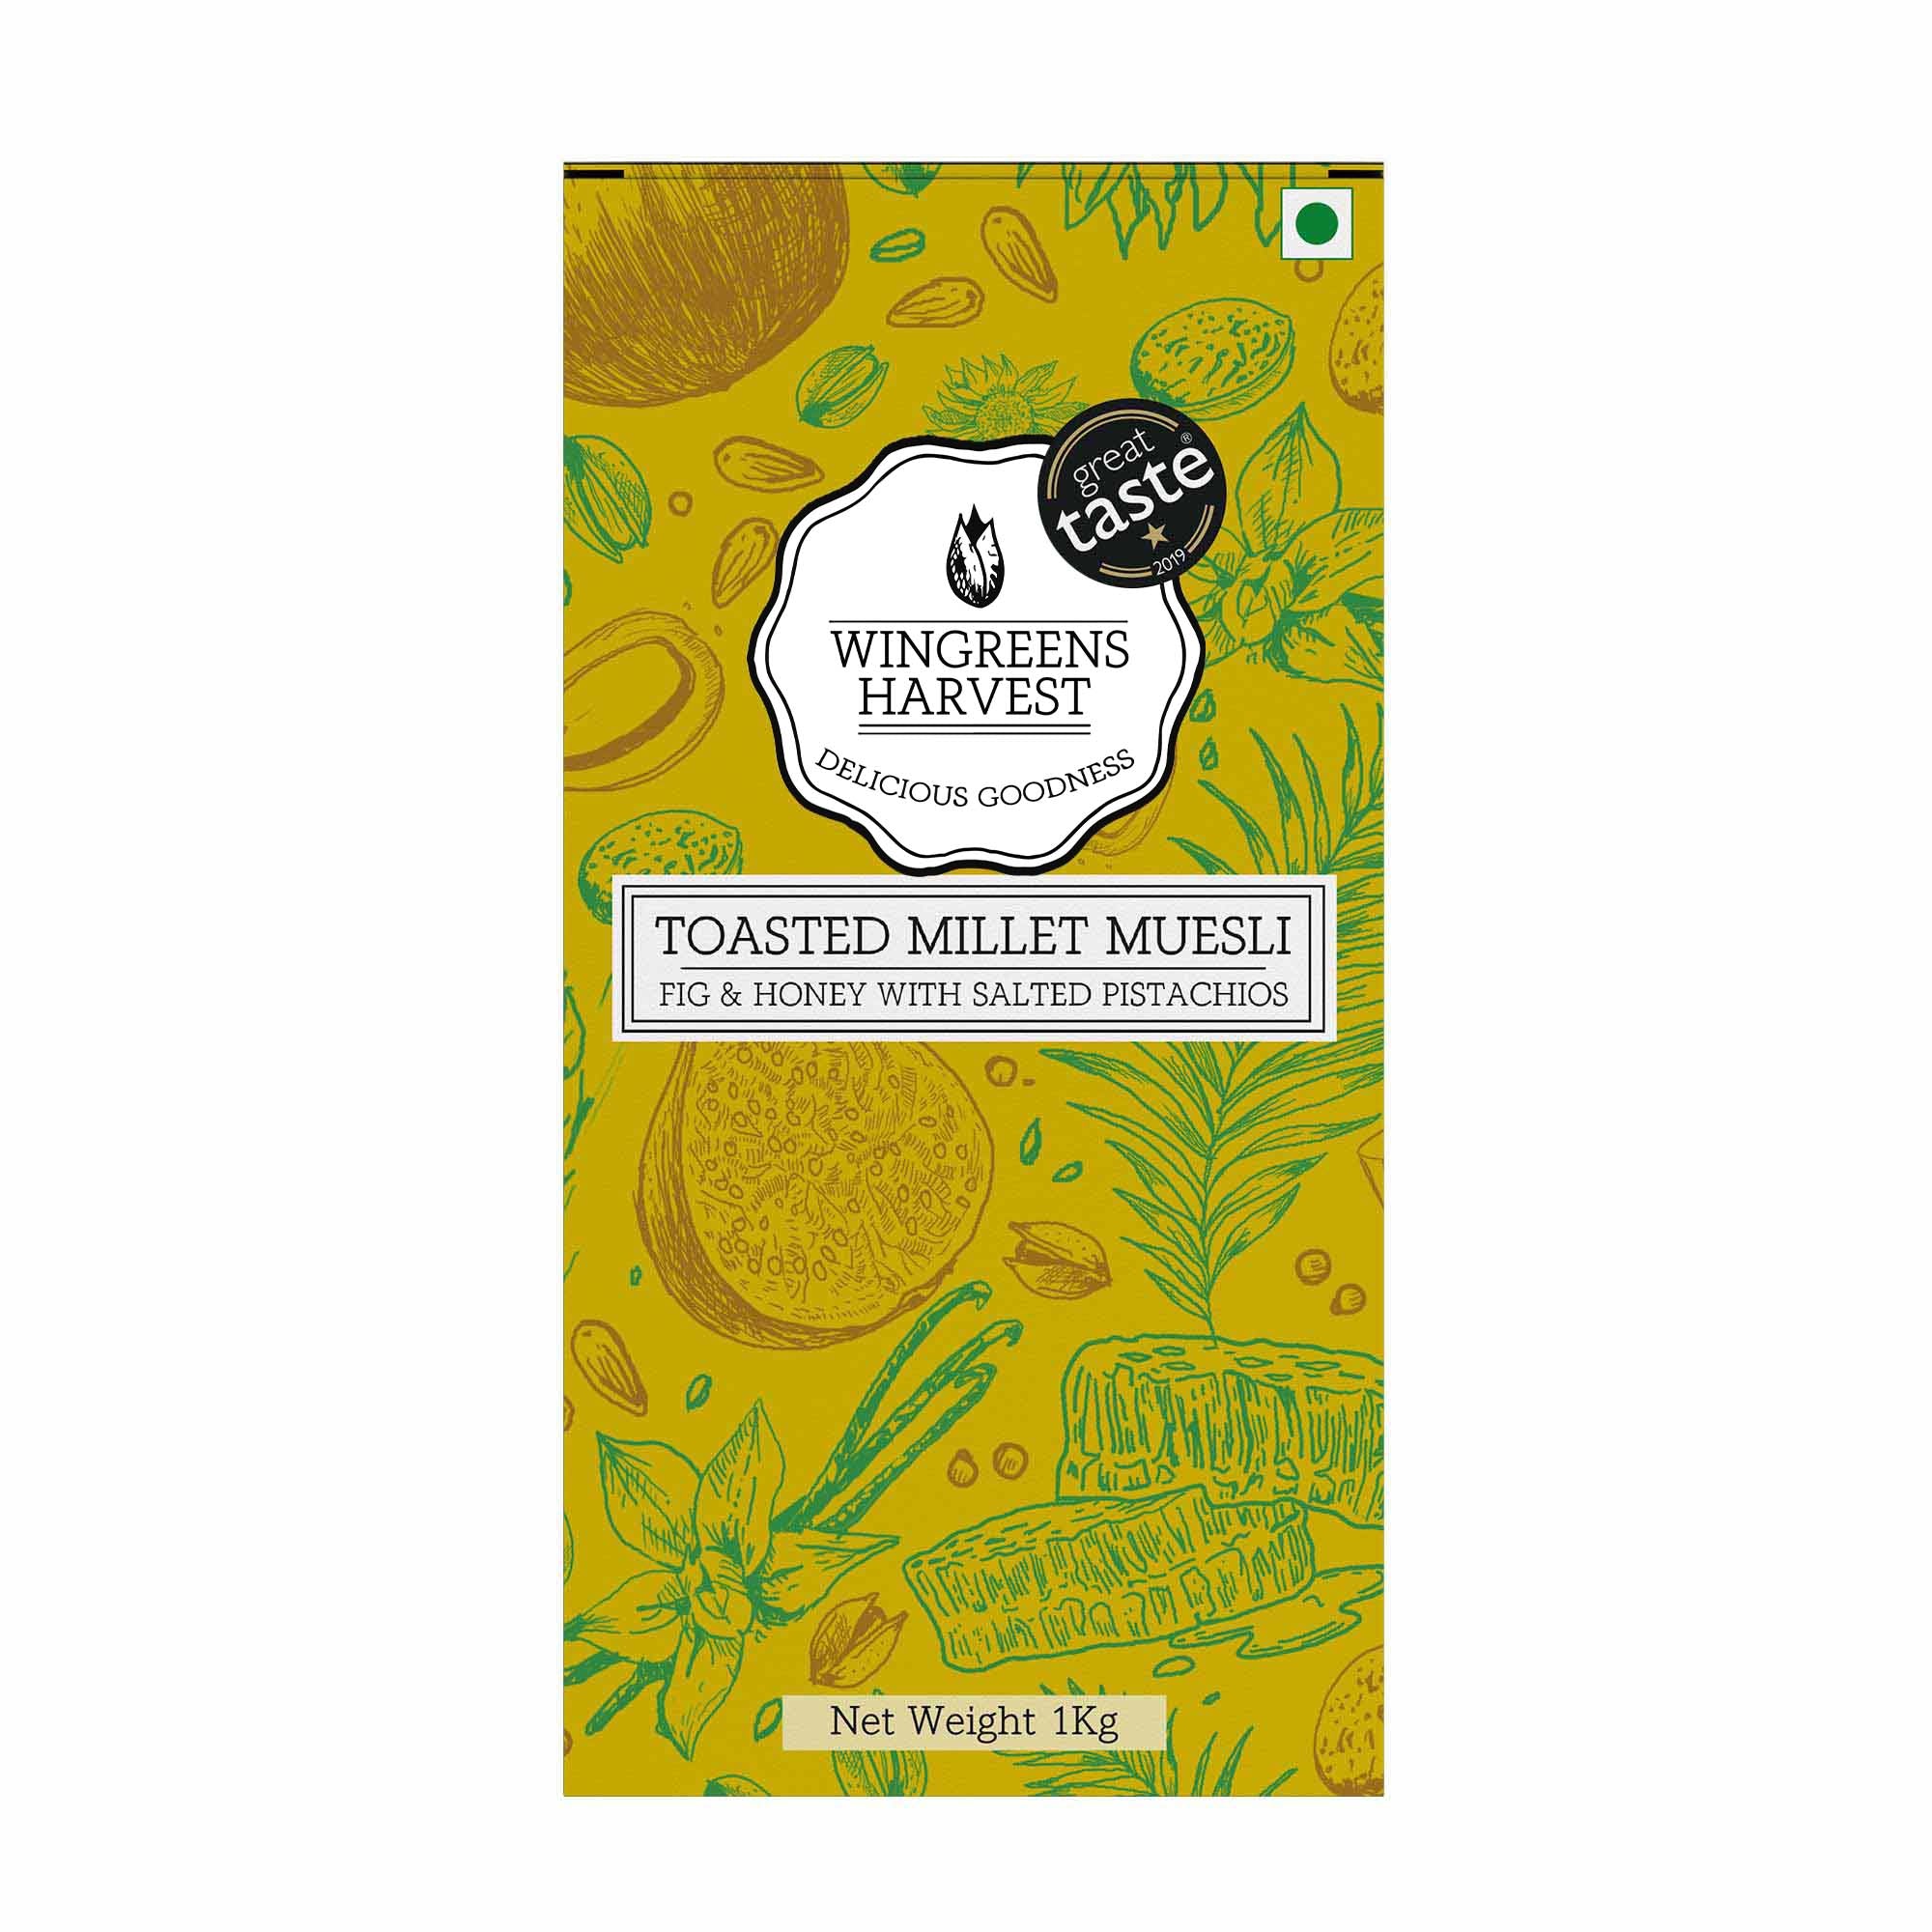 Toasted Millet Muesli: Fig and Honey with Salted Pistachios 1 Kg